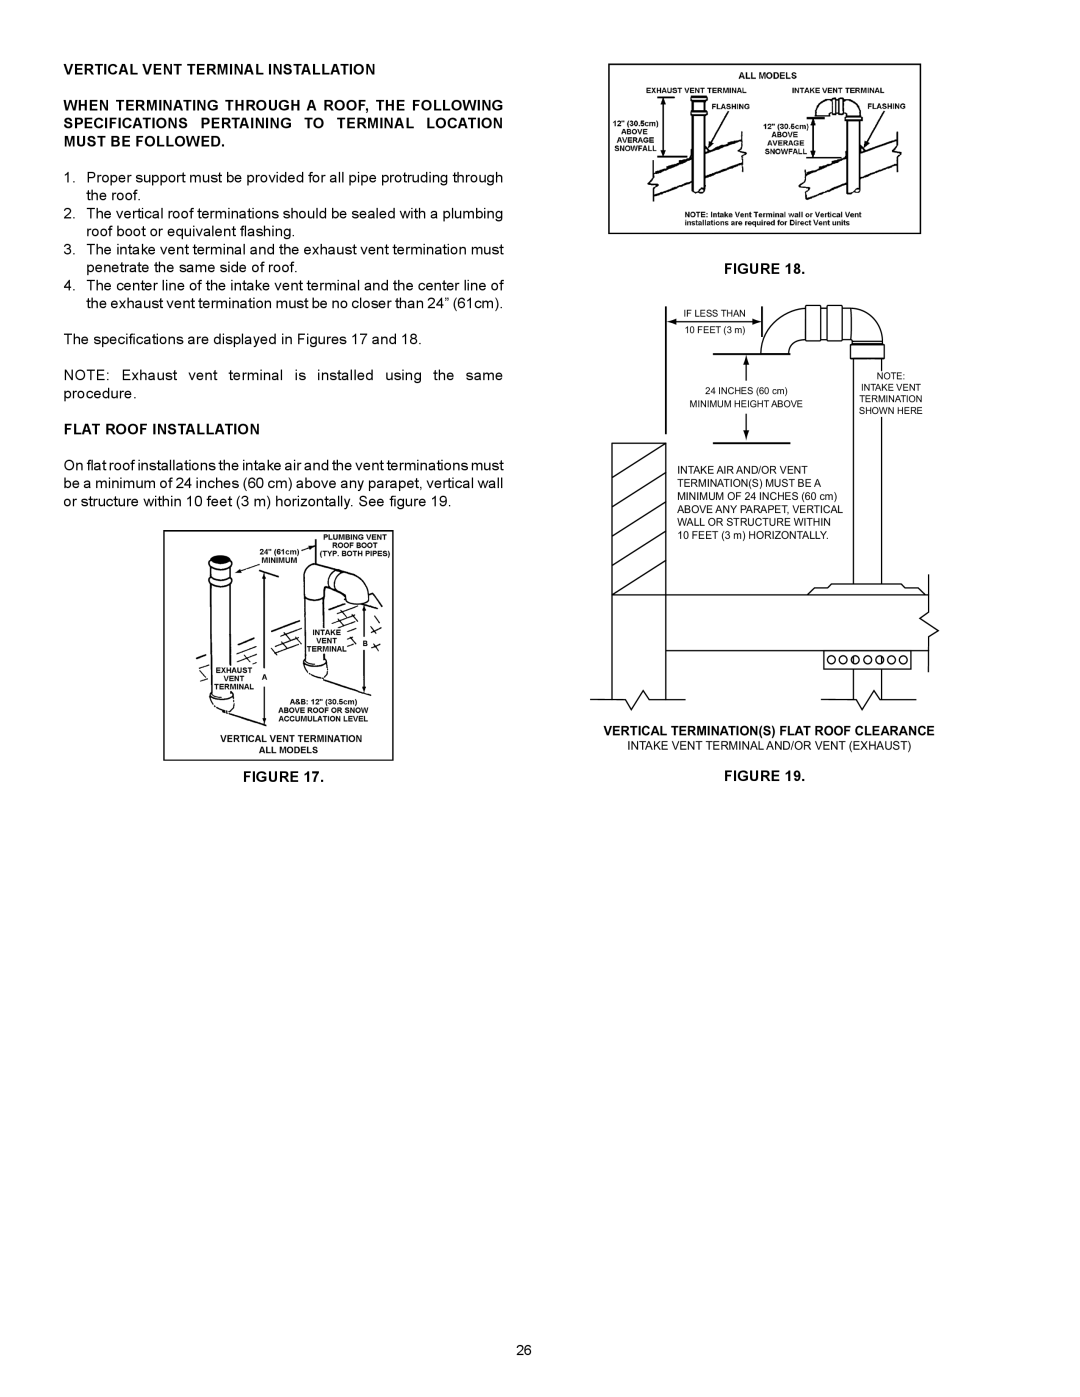 American Water Heater VG6250T100 instruction manual Vertical Vent Terminal Installation, Flat Roof Installation 